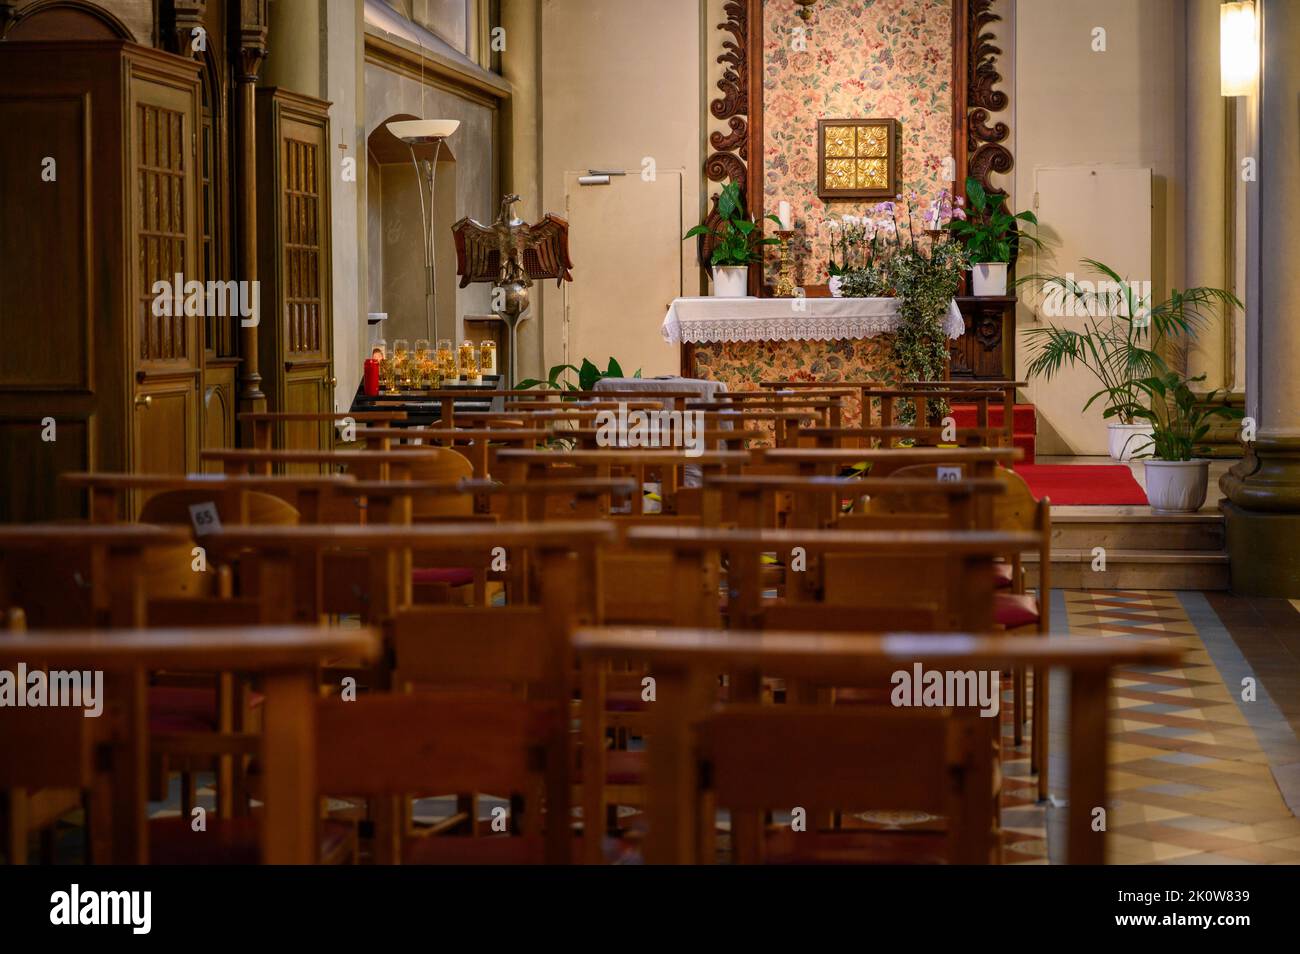 The tabernacle with the Most Blessed Sacrament in the St Alphonse church in Luxembourg City, Luxembourg. Stock Photo